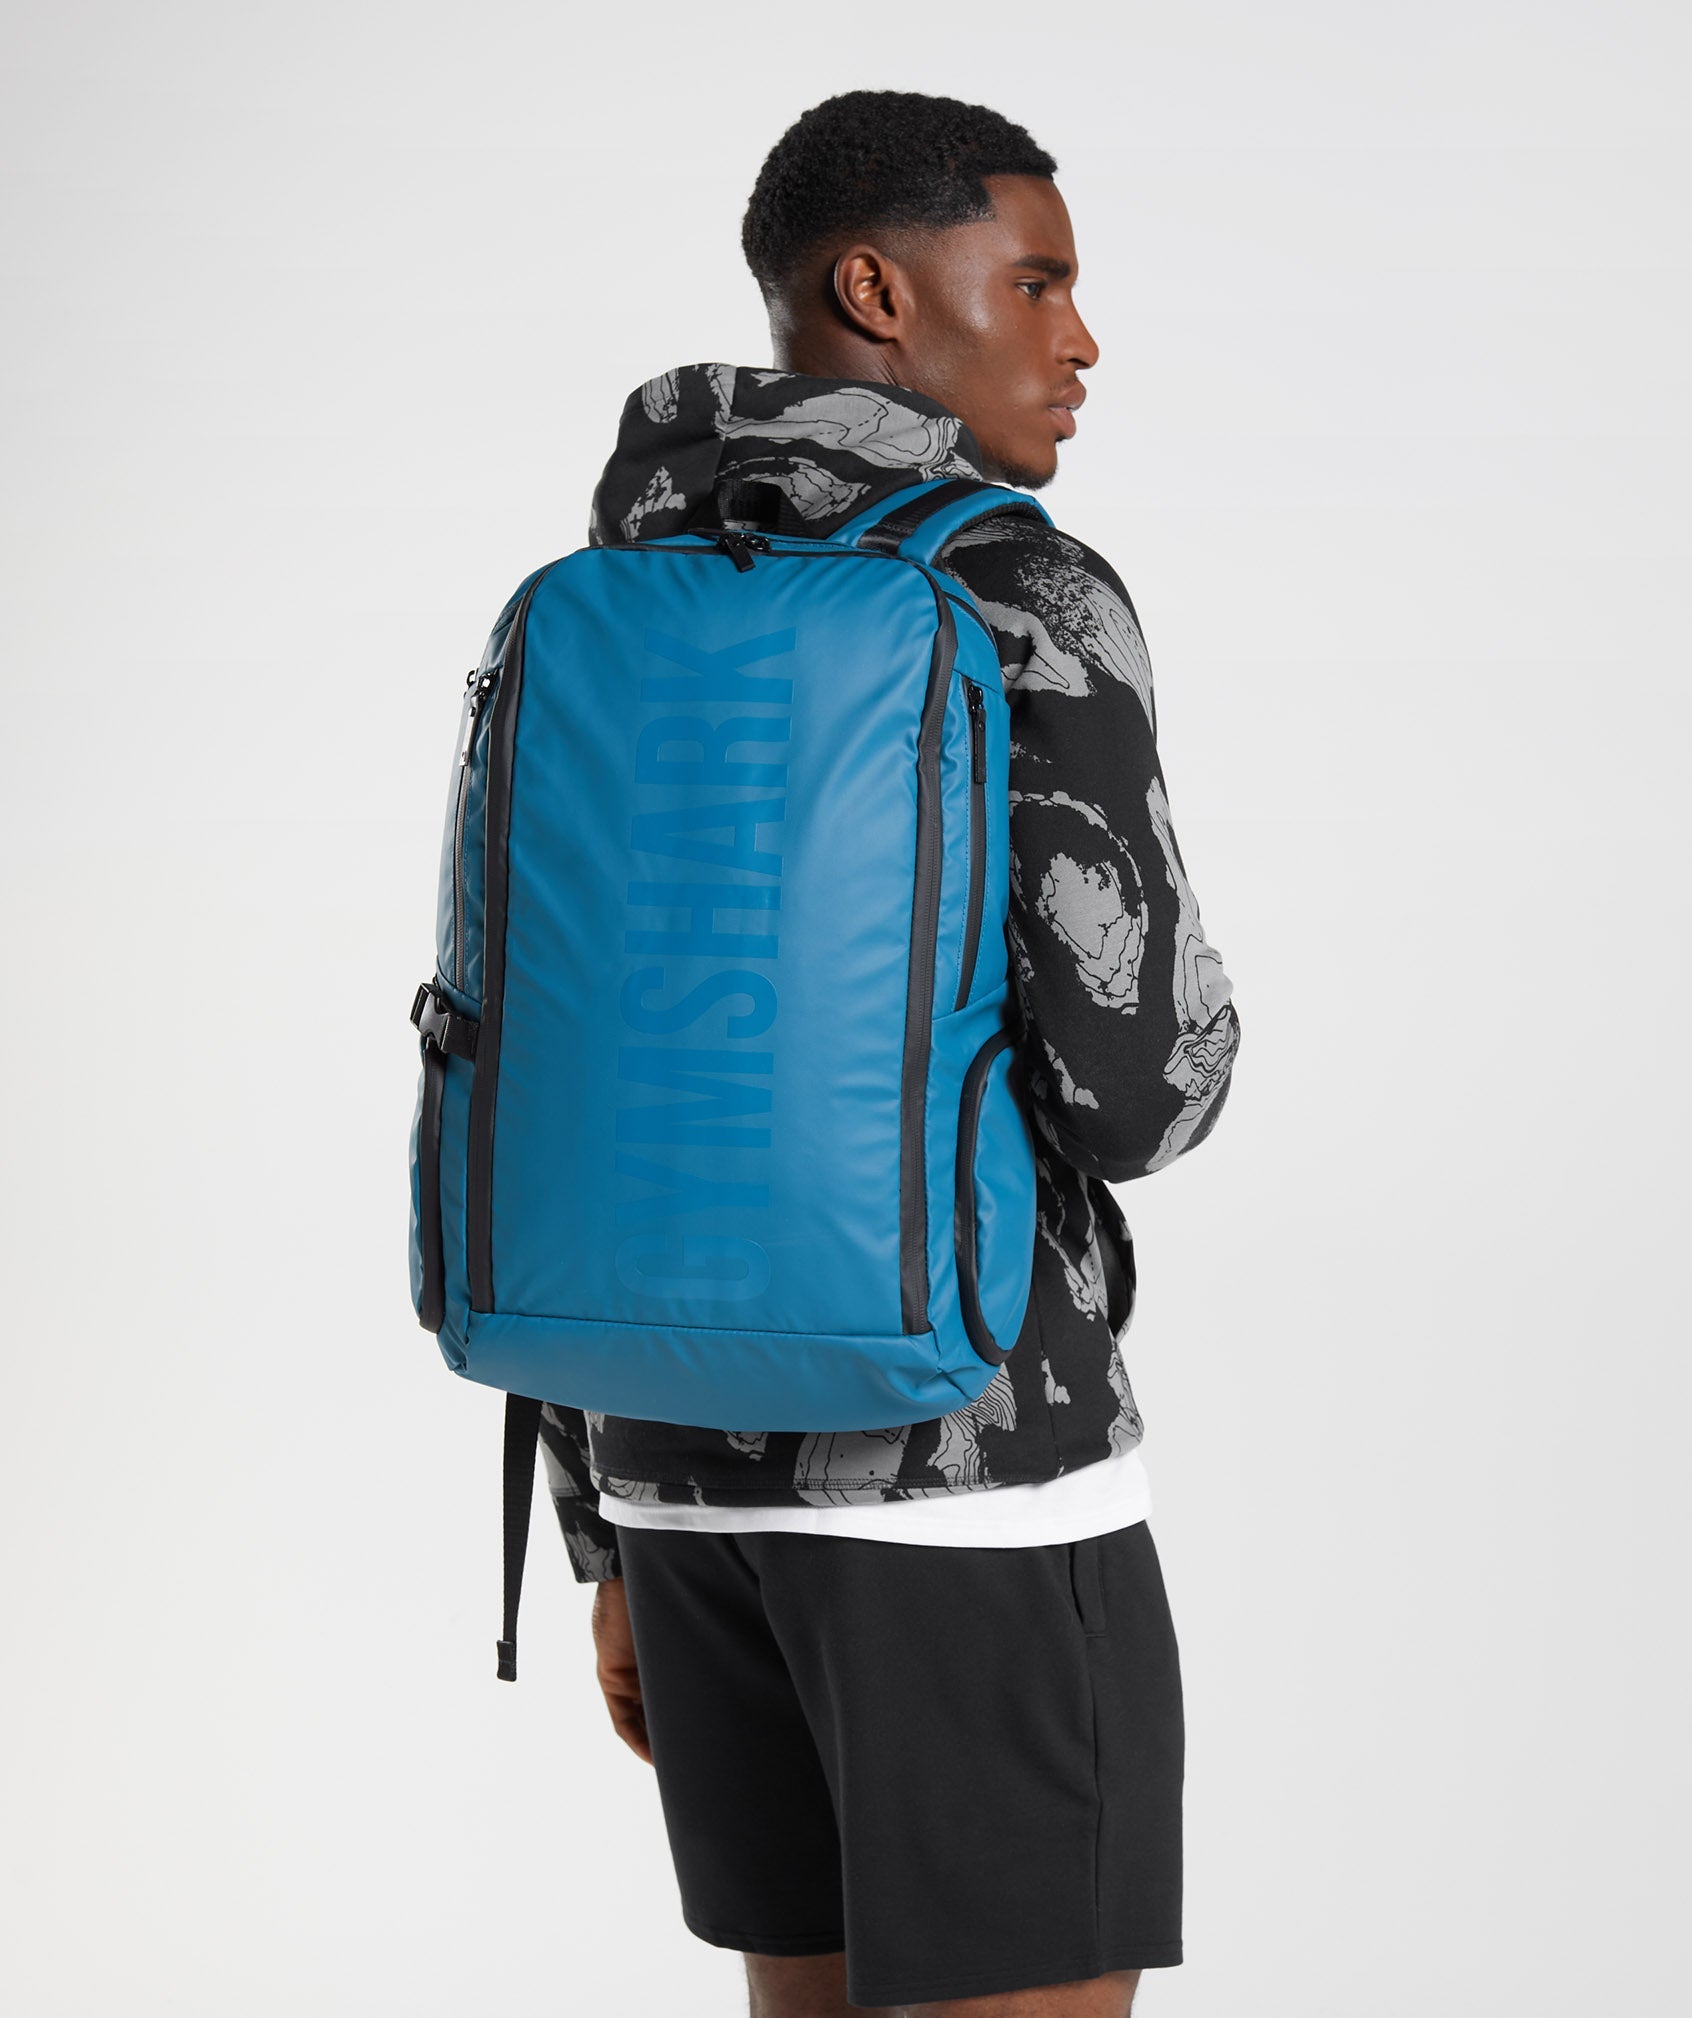 X-Series Bag 0.3 in Lakeside Blue - view 3